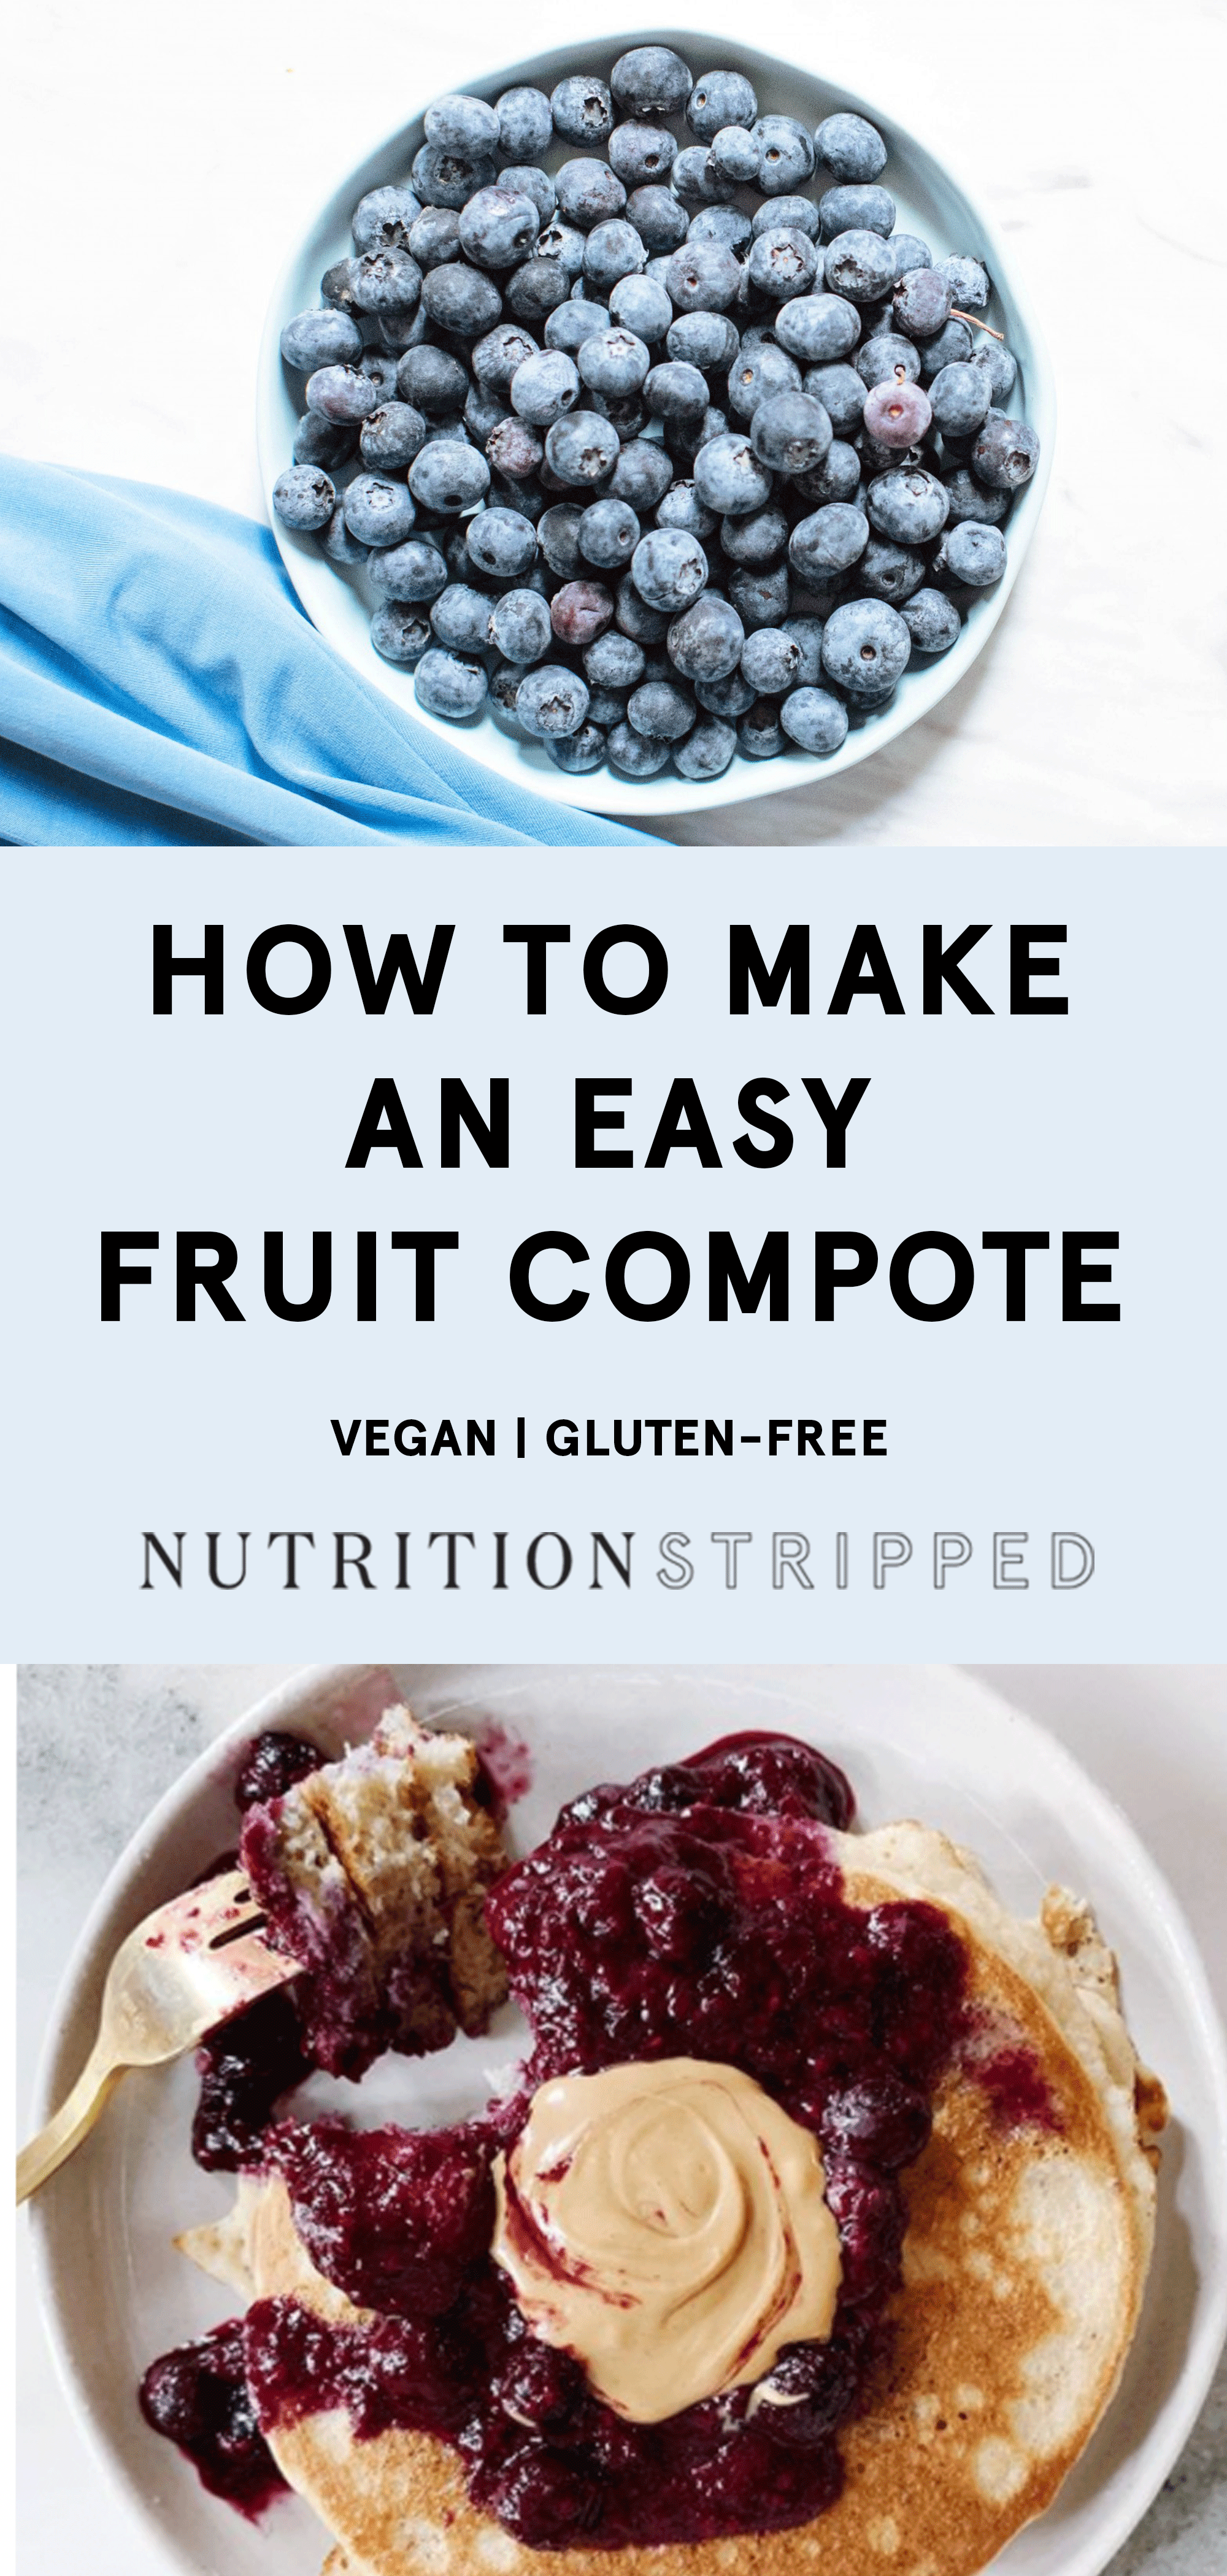 Fruit Compote Recipe | Nutrition Stripped